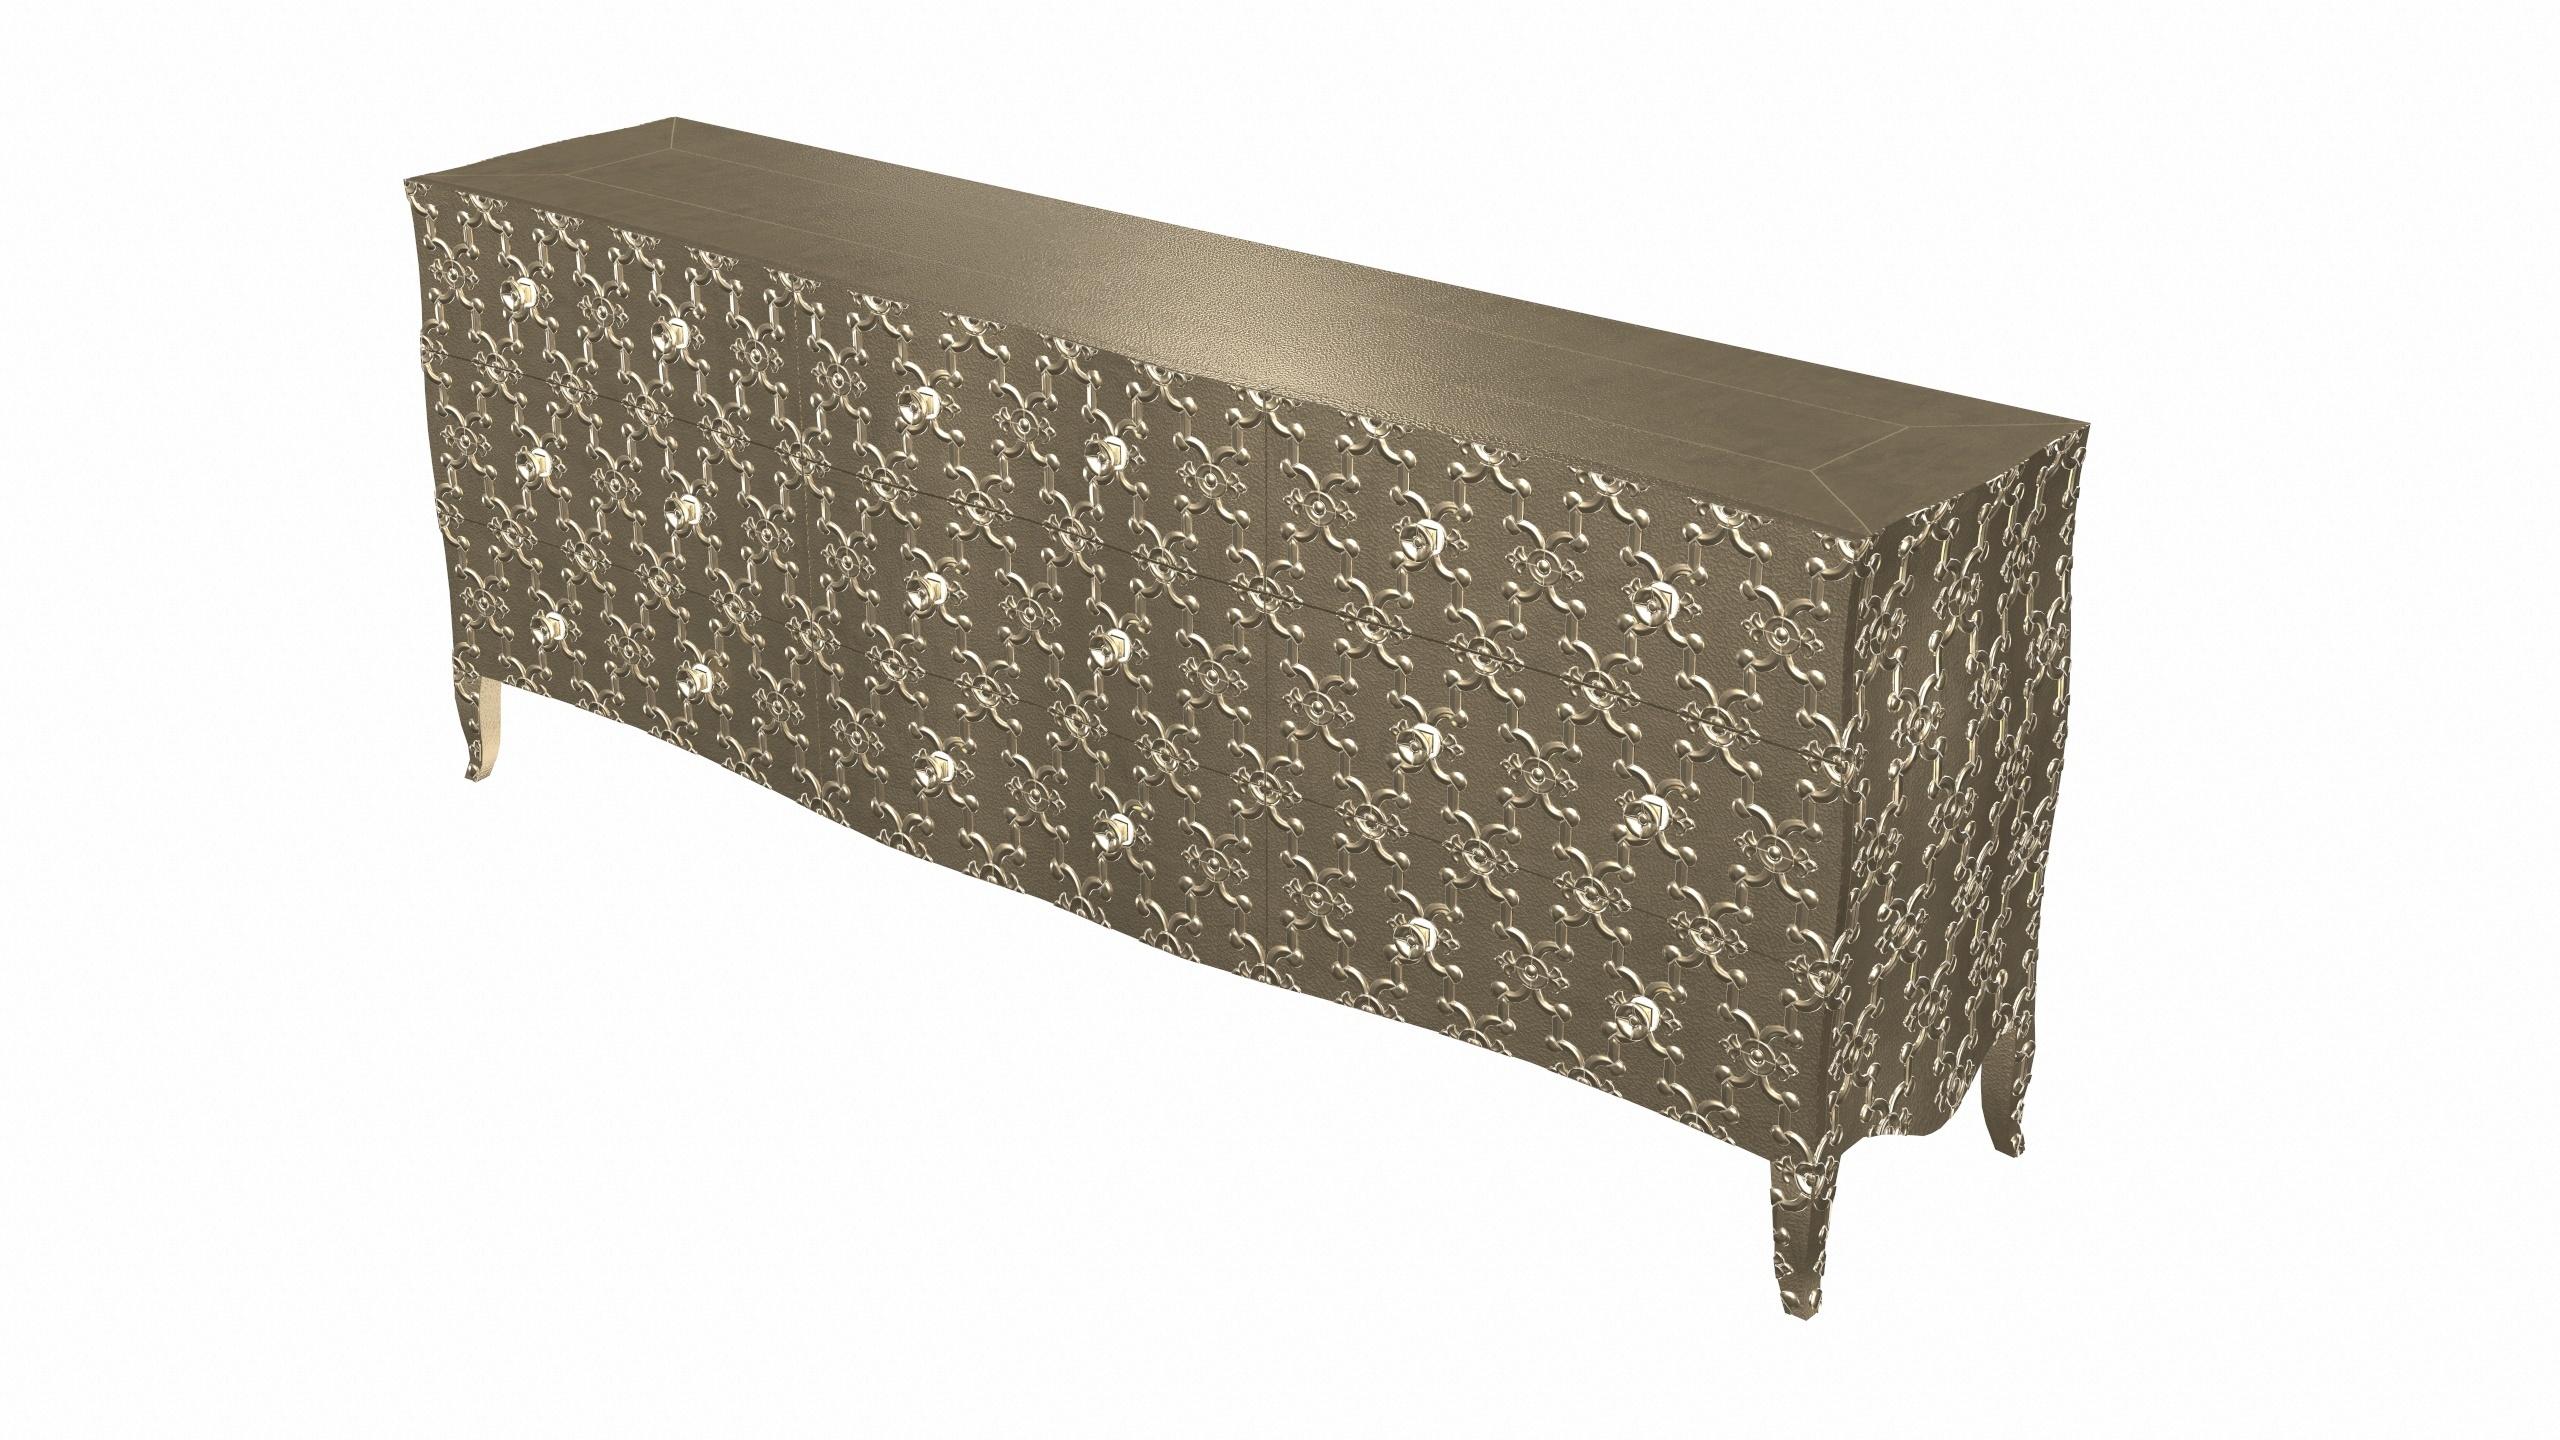 Indian Louise Art Deco Sideboard Fine Hammered Brass by Paul Mathieu for S. Odegard For Sale